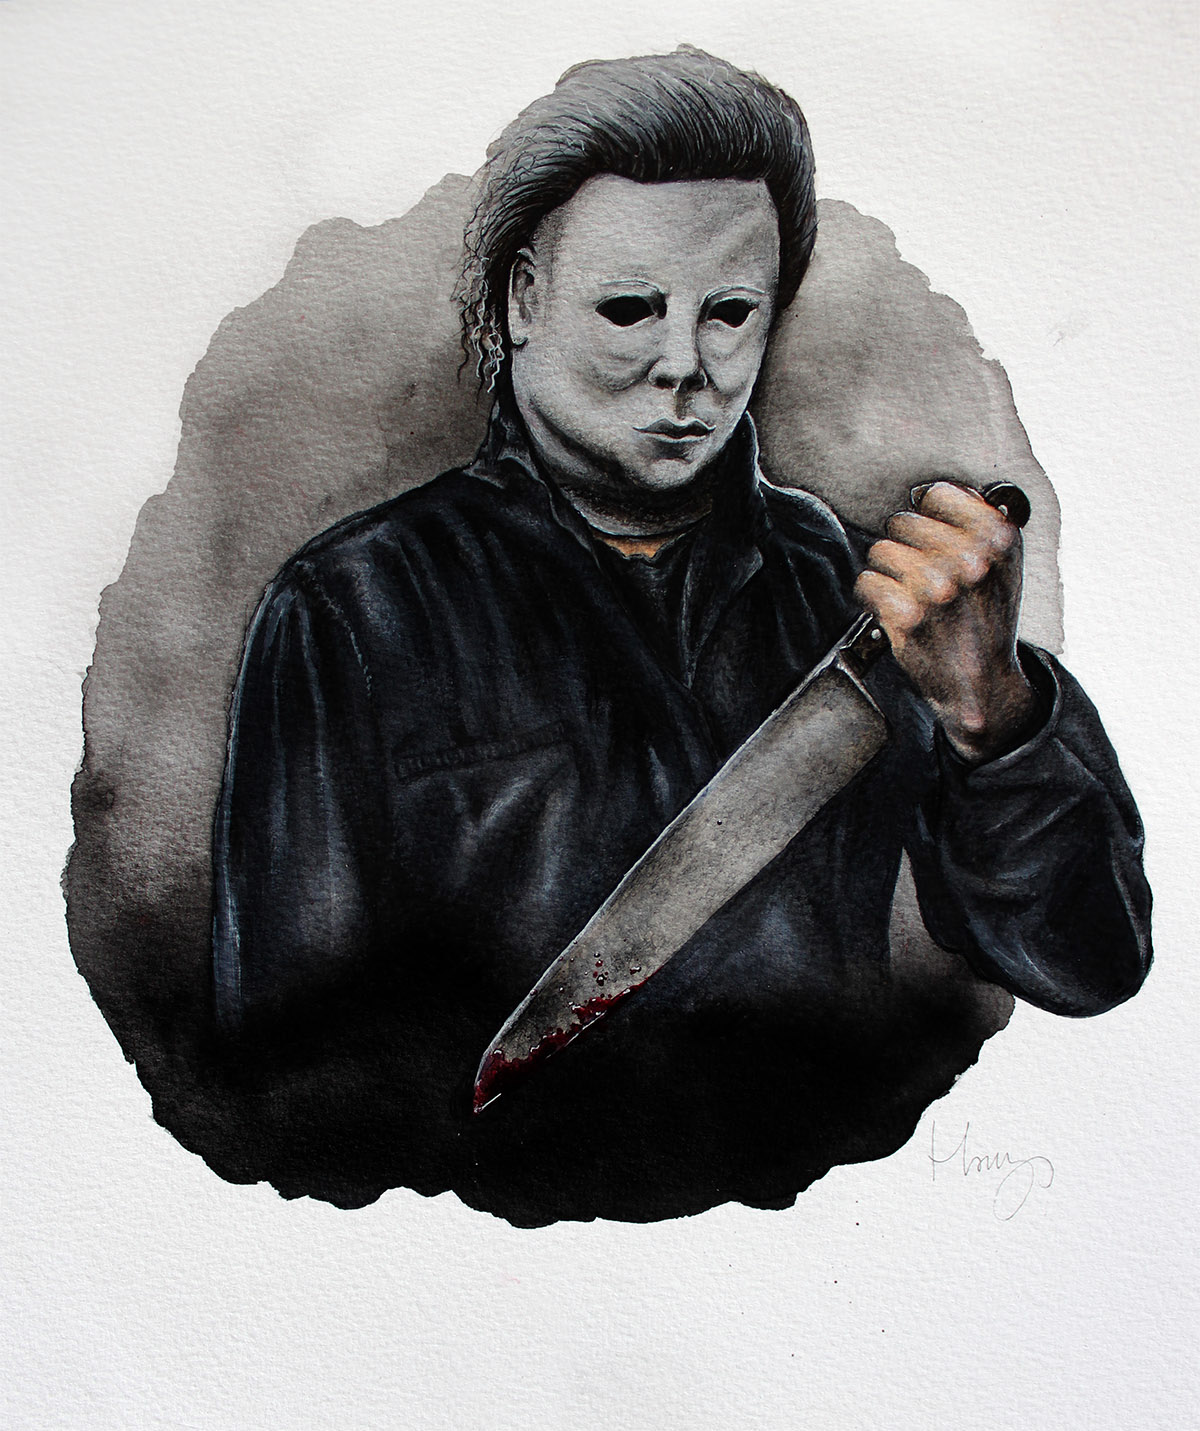 Michael Myers Sketch at Explore collection of